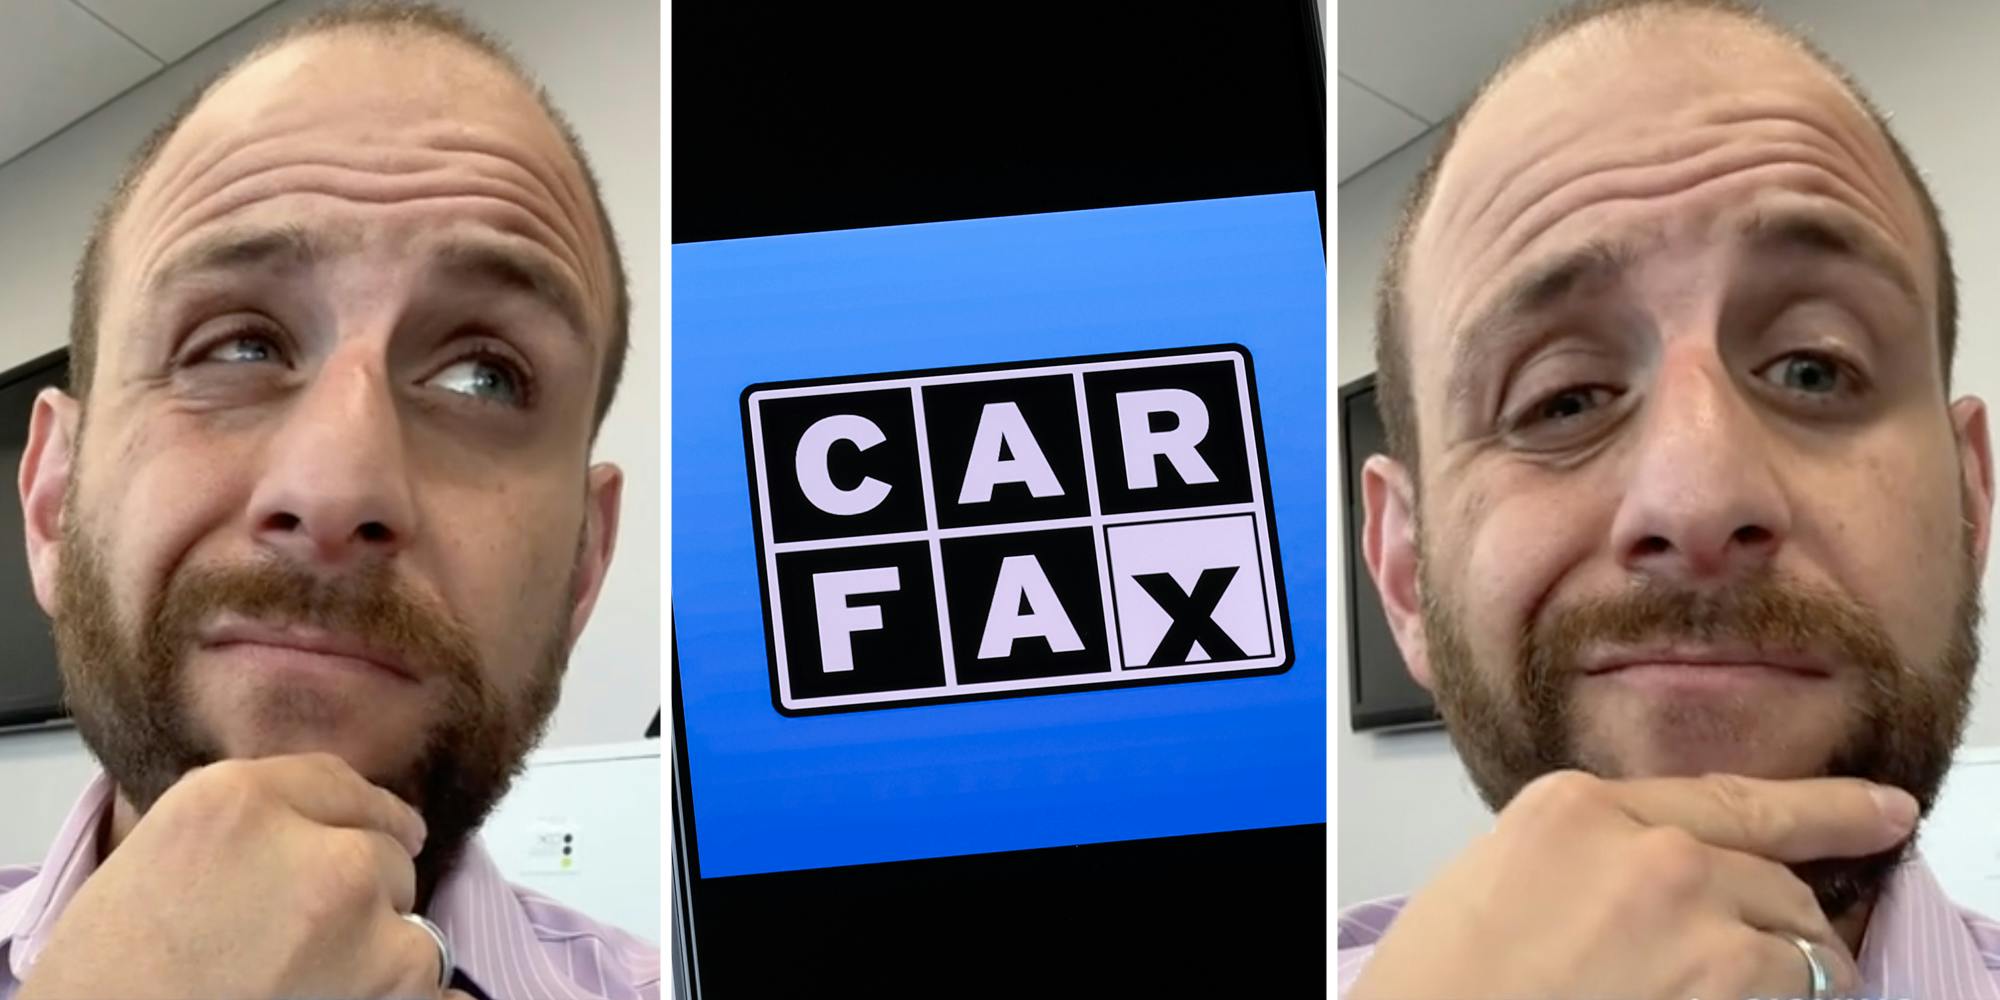 ‘Avoiding that one doc’: Viewers divided after car salesman jokes that he didn’t want to hand customer over the CarFax